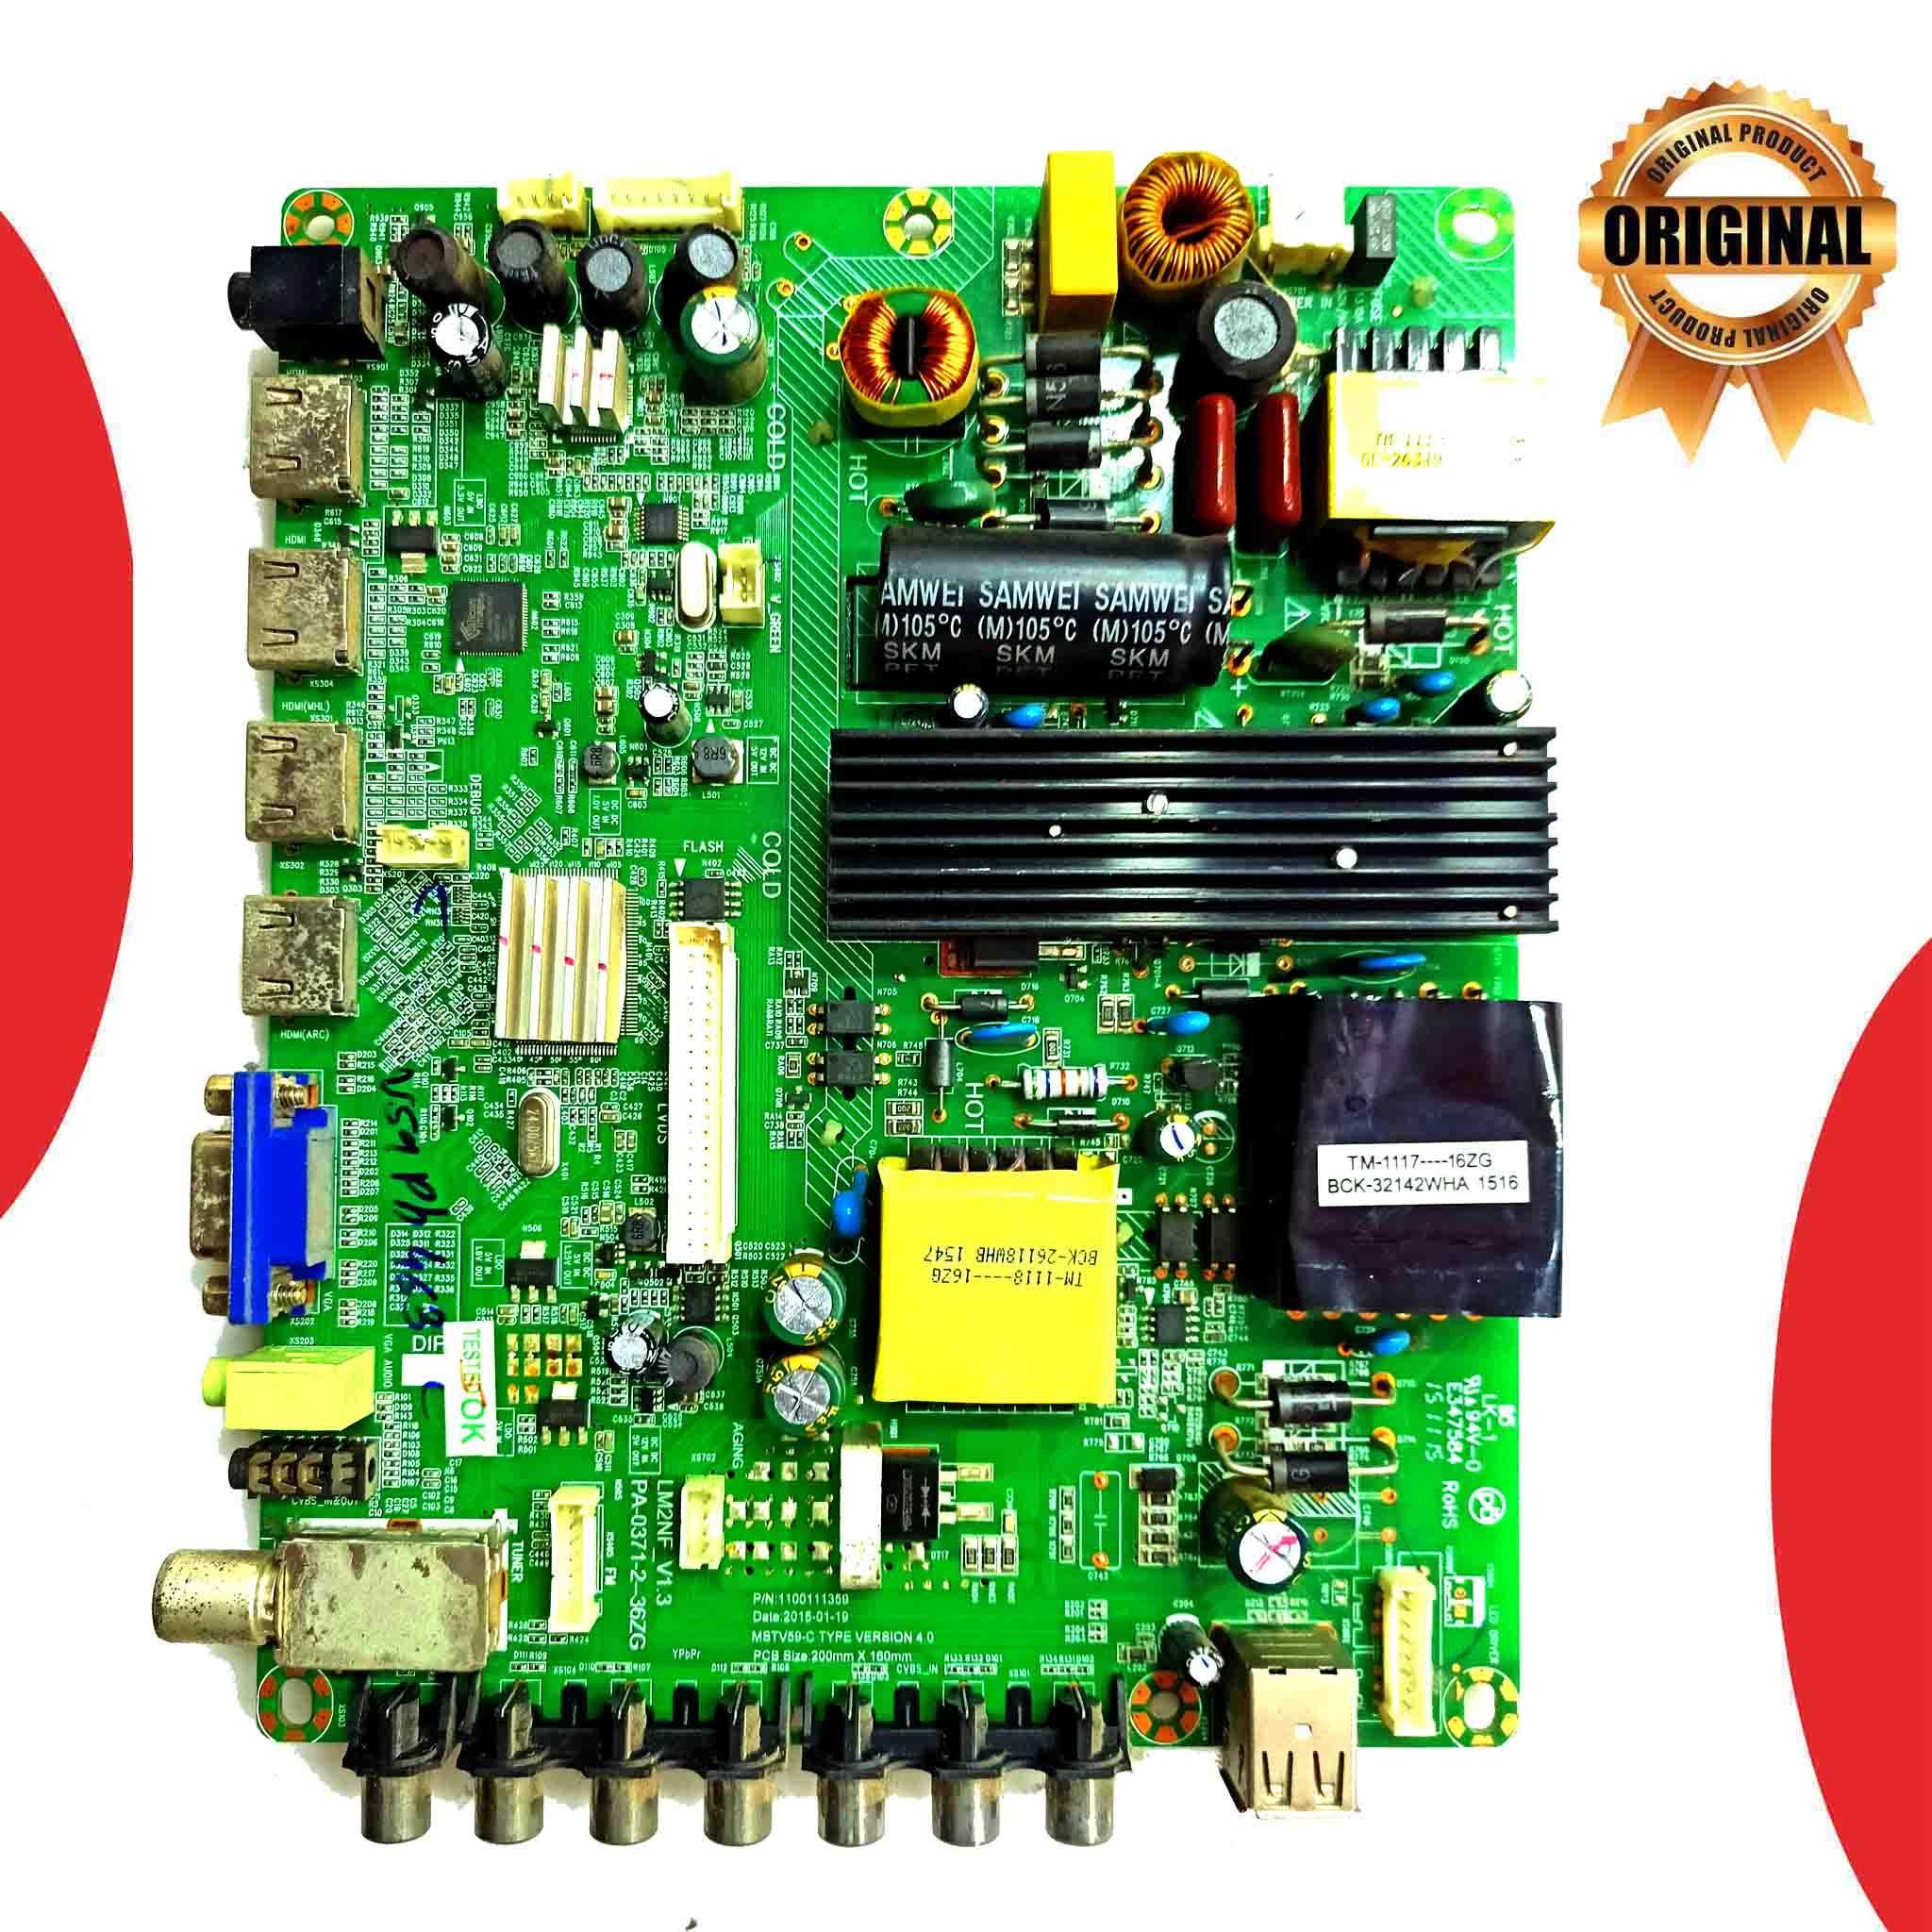 Philips 39 inch LED TV Motherboard for Model 39PFL3850V7A11 - Great Bharat Electronics